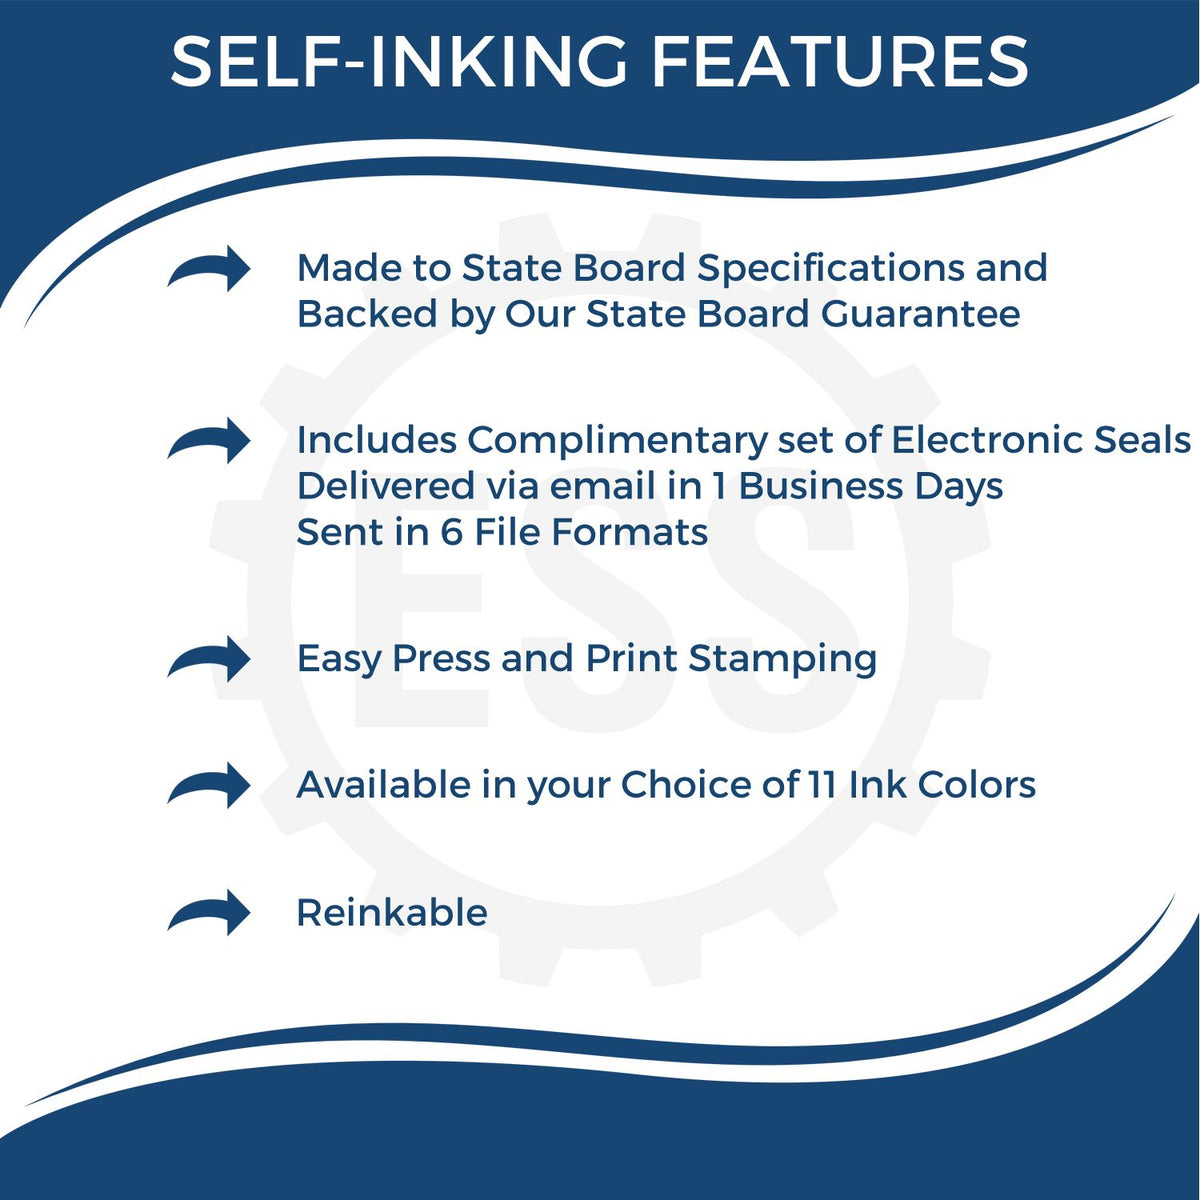 A picture of an infographic highlighting the selling points for the Self-Inking Rectangular Idaho Notary Stamp